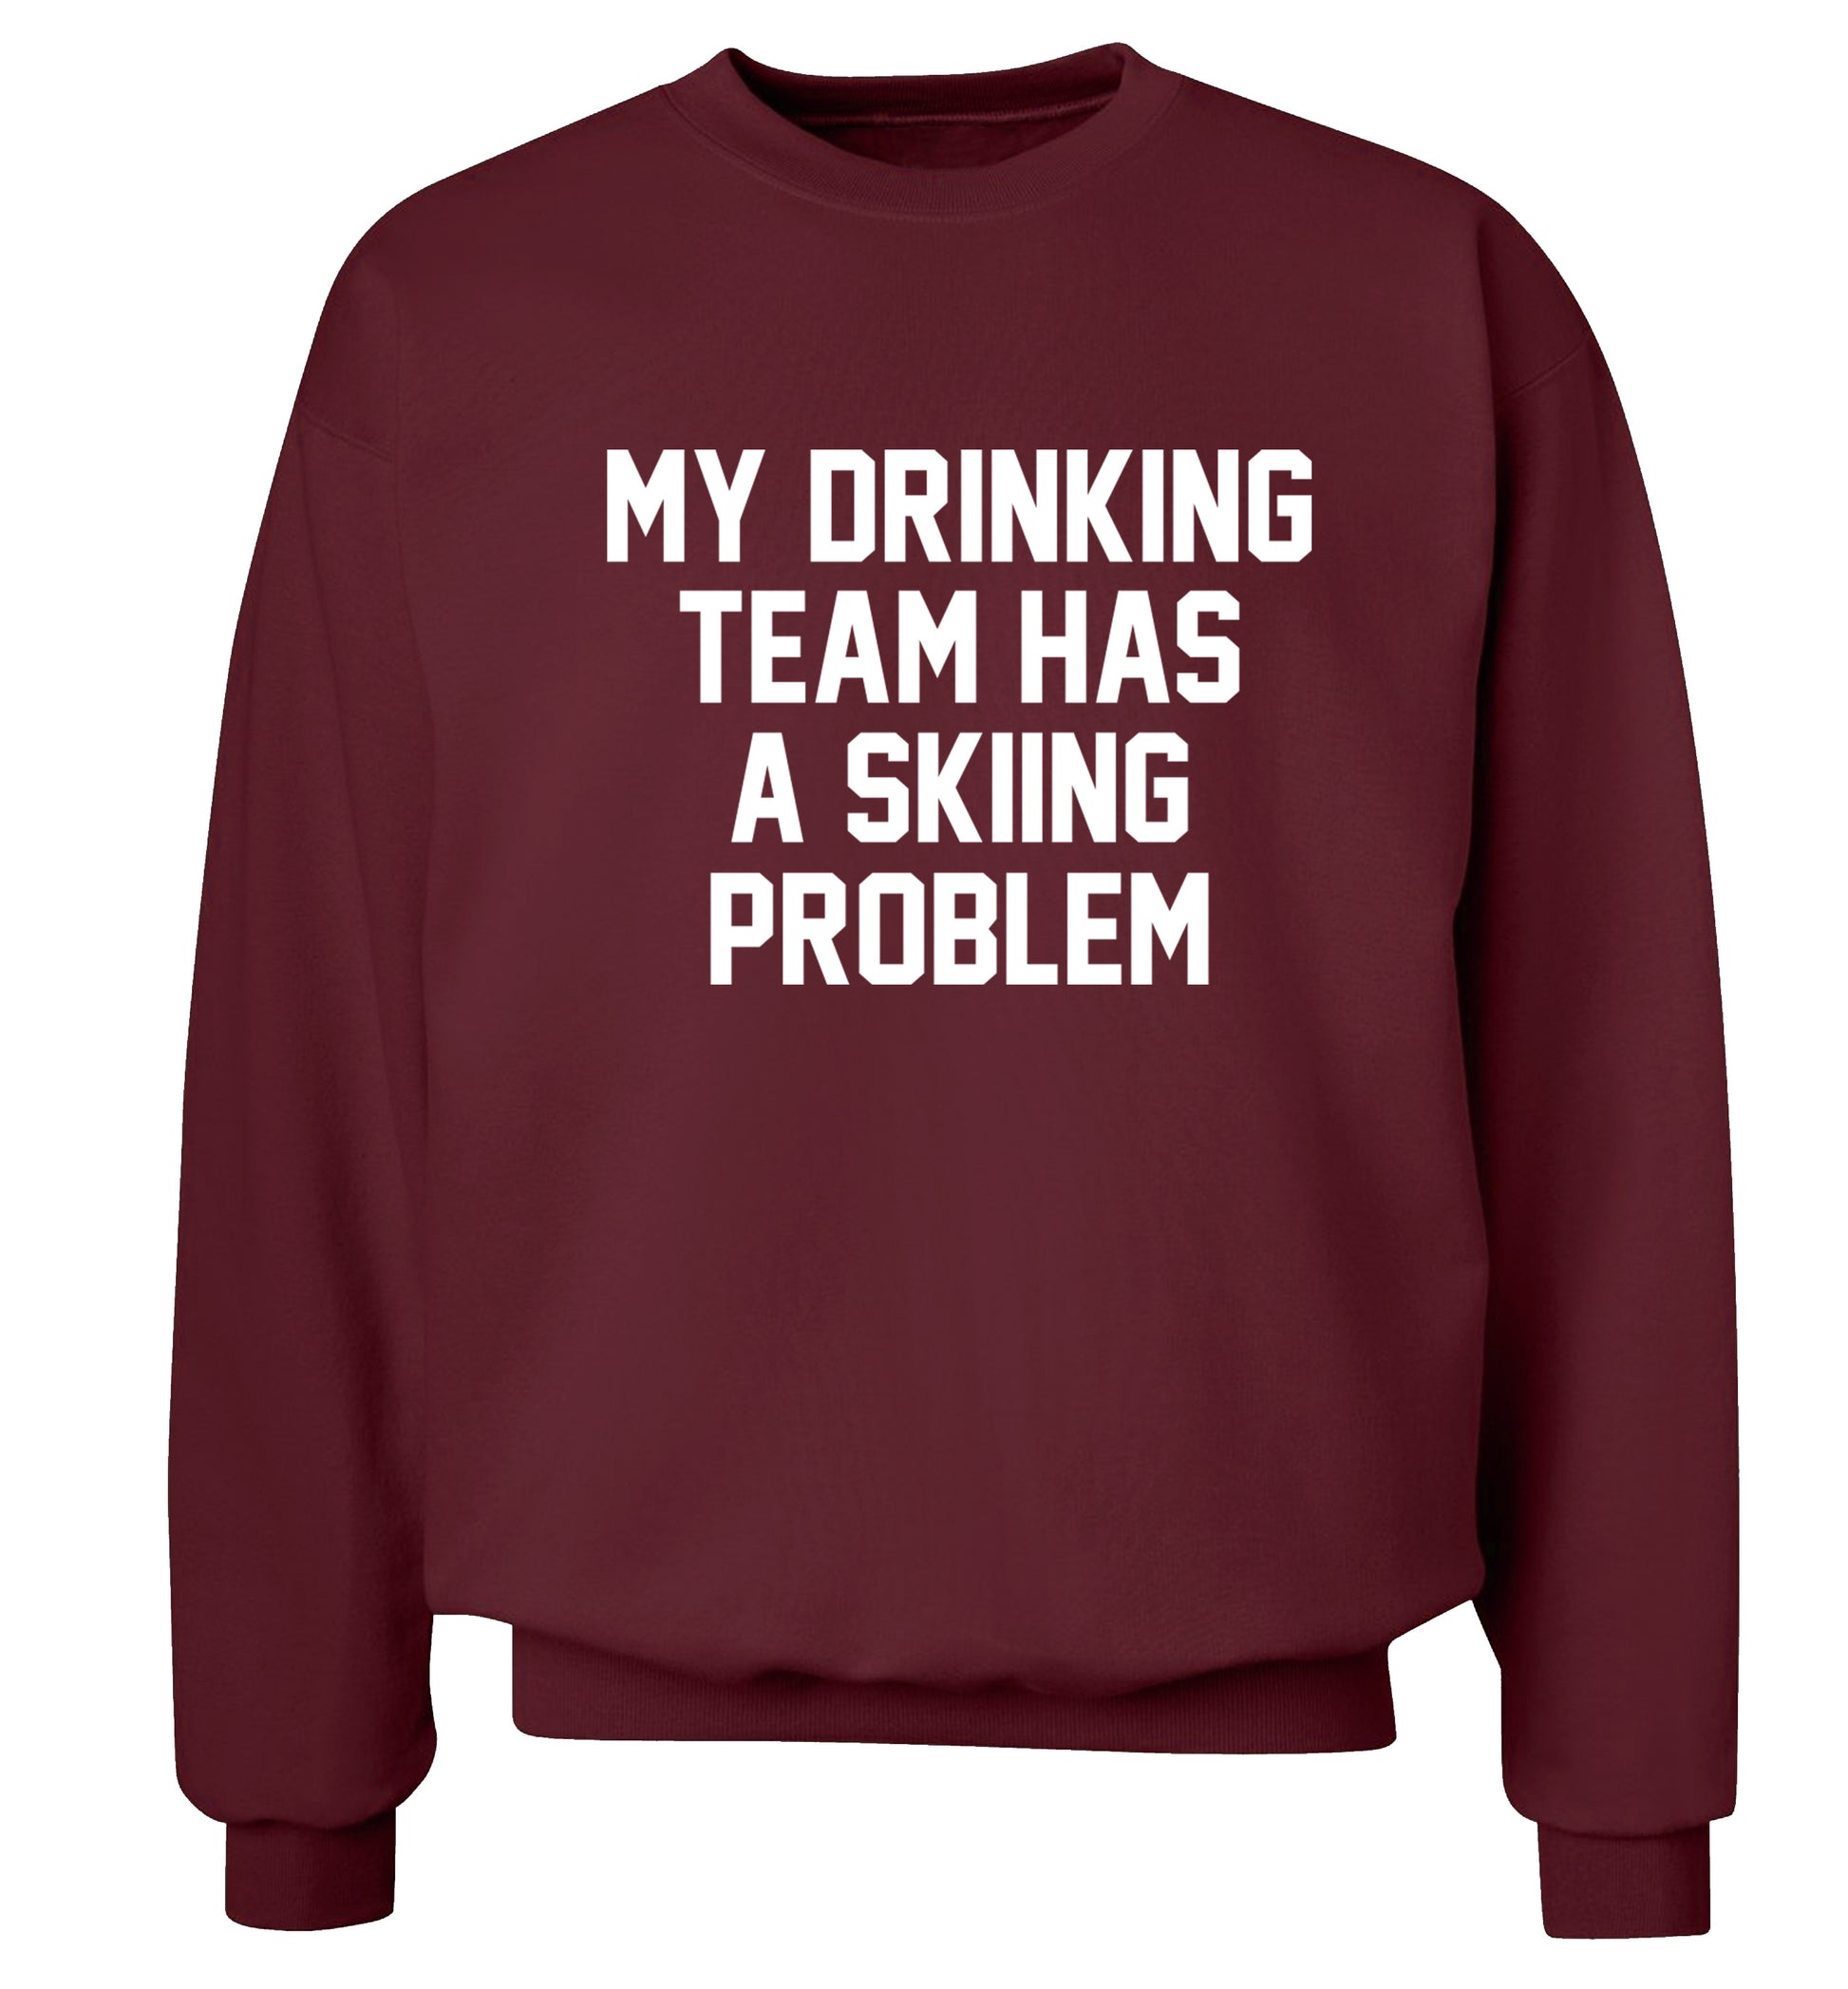 My drinking team has a skiing problem Adult's unisexmaroon Sweater 2XL